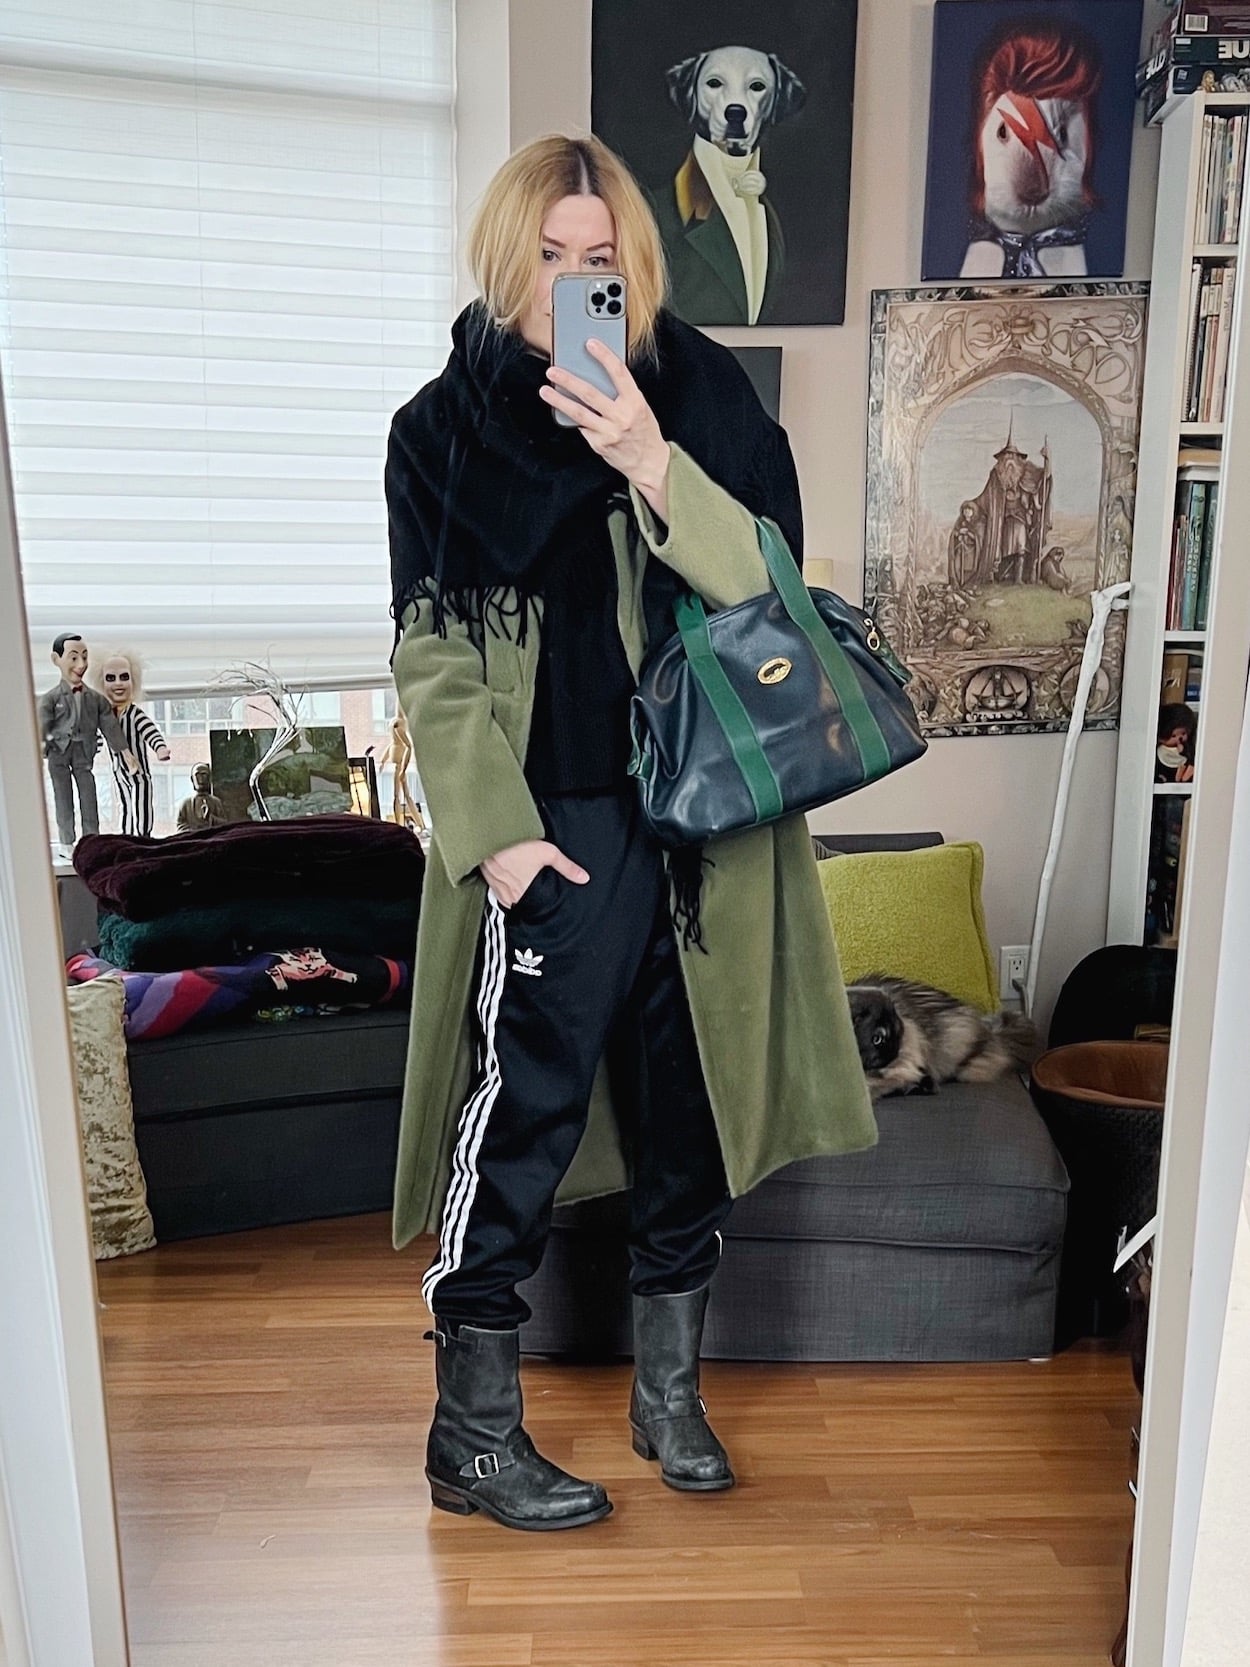 A blonde woman is wearing a black sweater, black Adidas track pants, moto boots, a green coat with a black shawl scarf and is carrying a vintage bag.